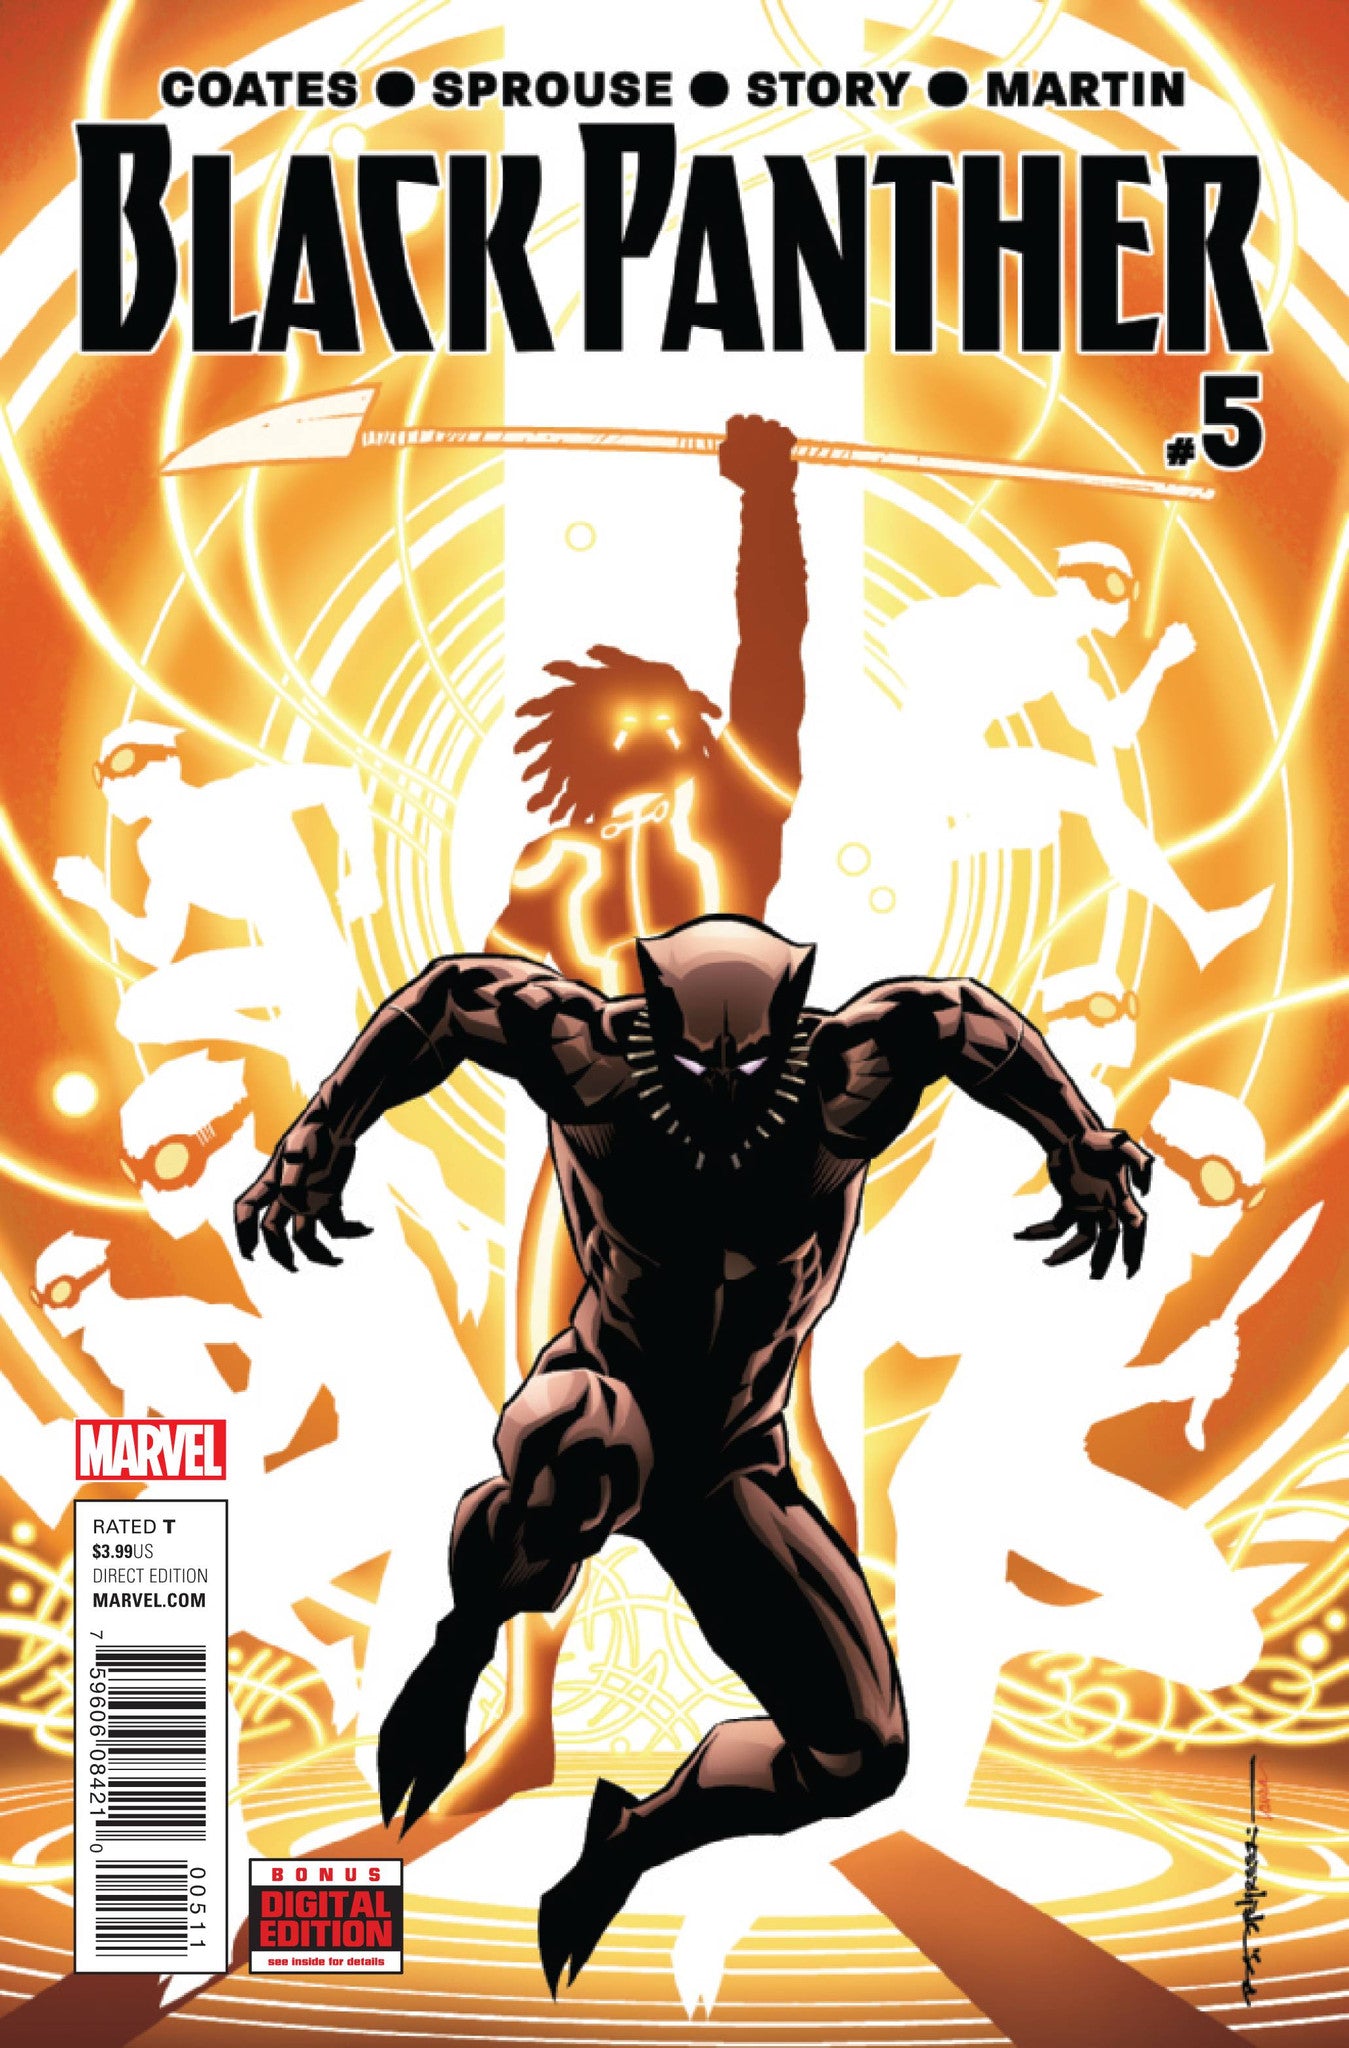 BLACK PANTHER #5 COVER